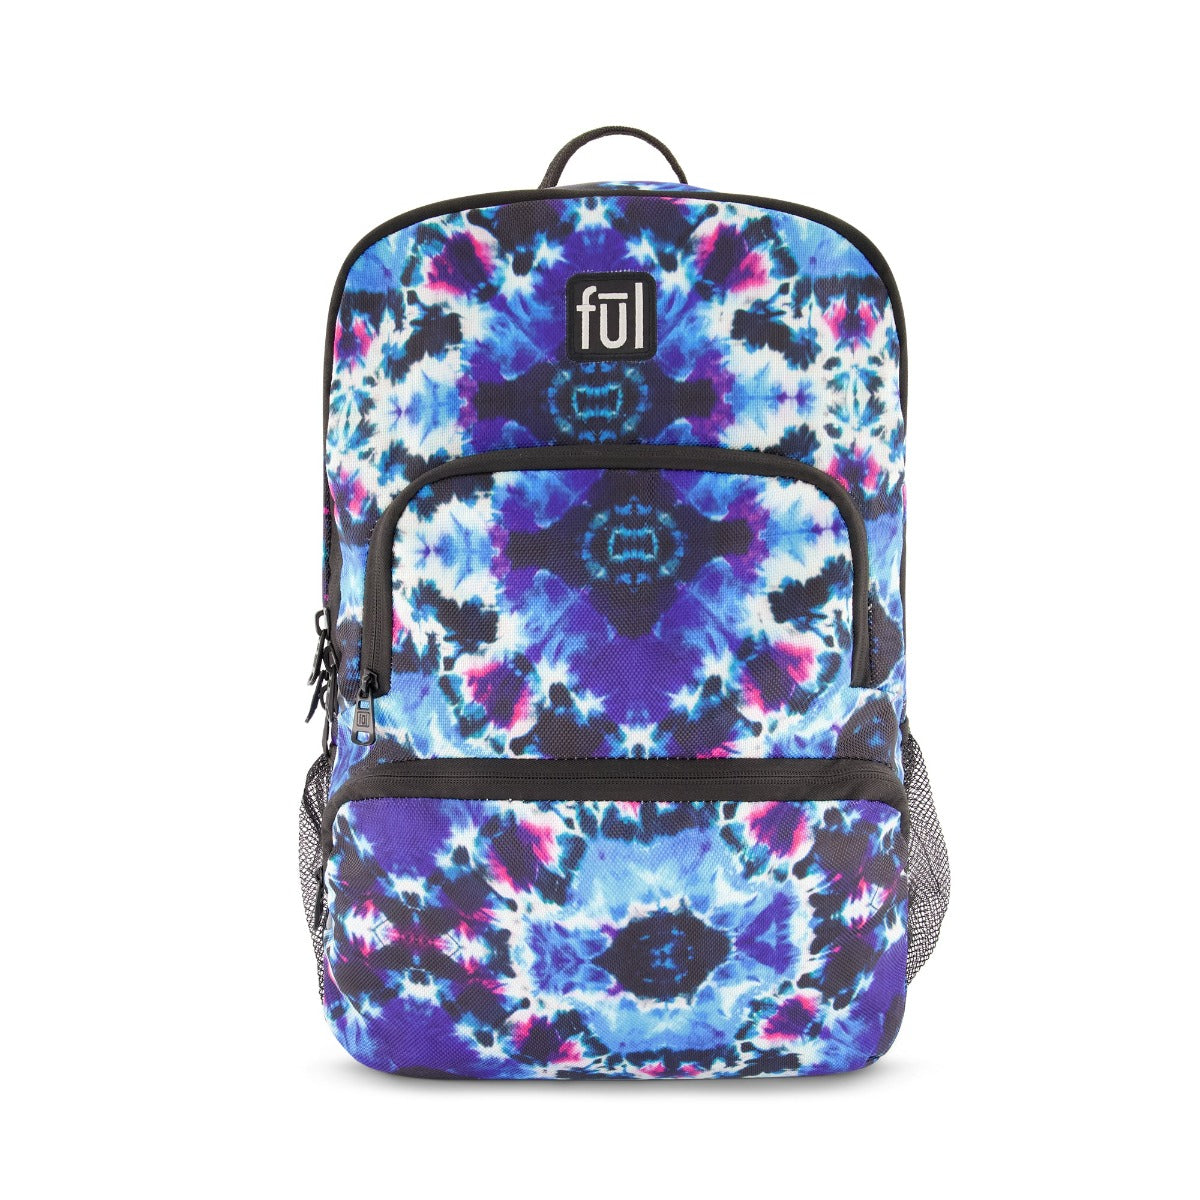 Terrace Laptop Backpack FUL Blue White tie dye Carry-On Backpack On Sale